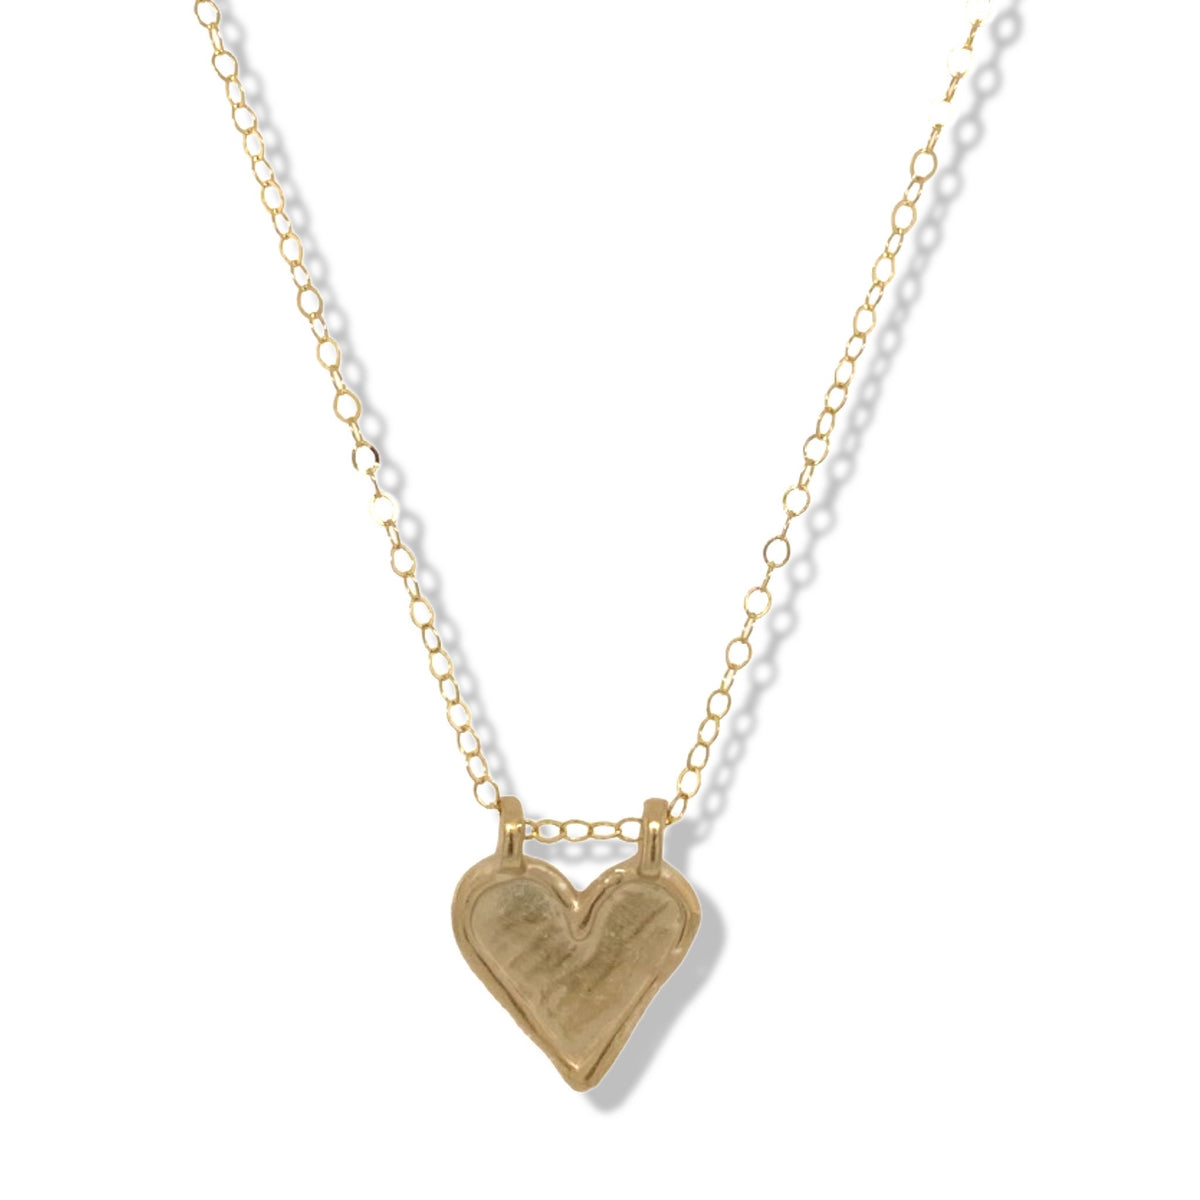 Large Heart Charm Necklace In Gold | Keely Smith Jewelry | Nantucket